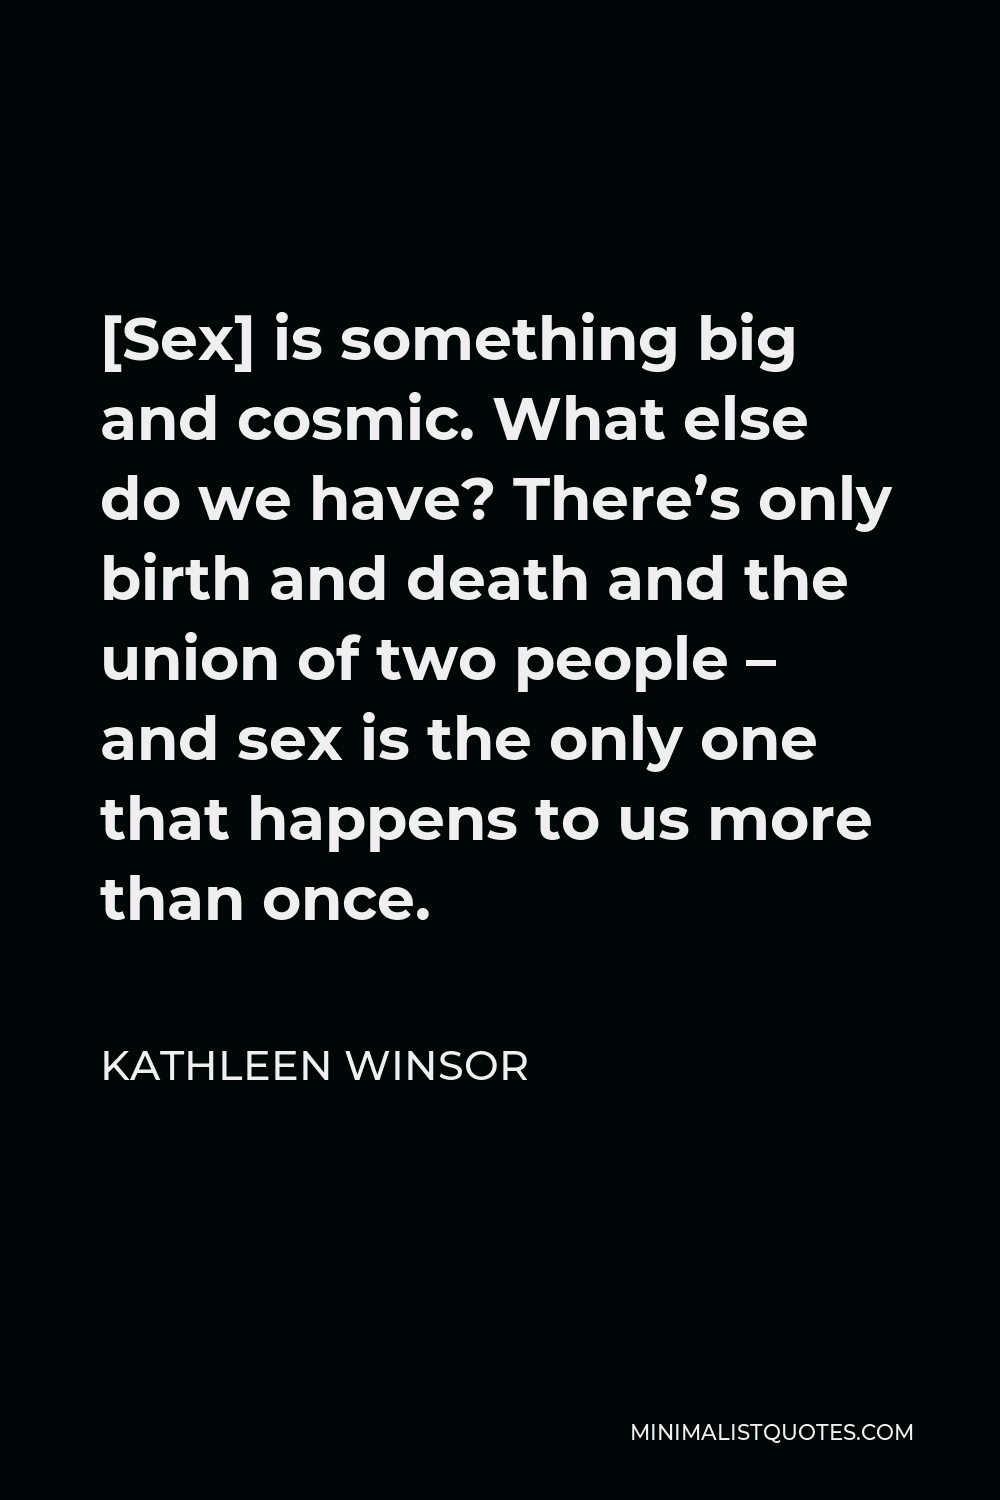 Kathleen Winsor Quote - [Sex] is something big and cosmic. What else do we have? There’s only birth and death and the union of two people – and sex is the only one that happens to us more than once.